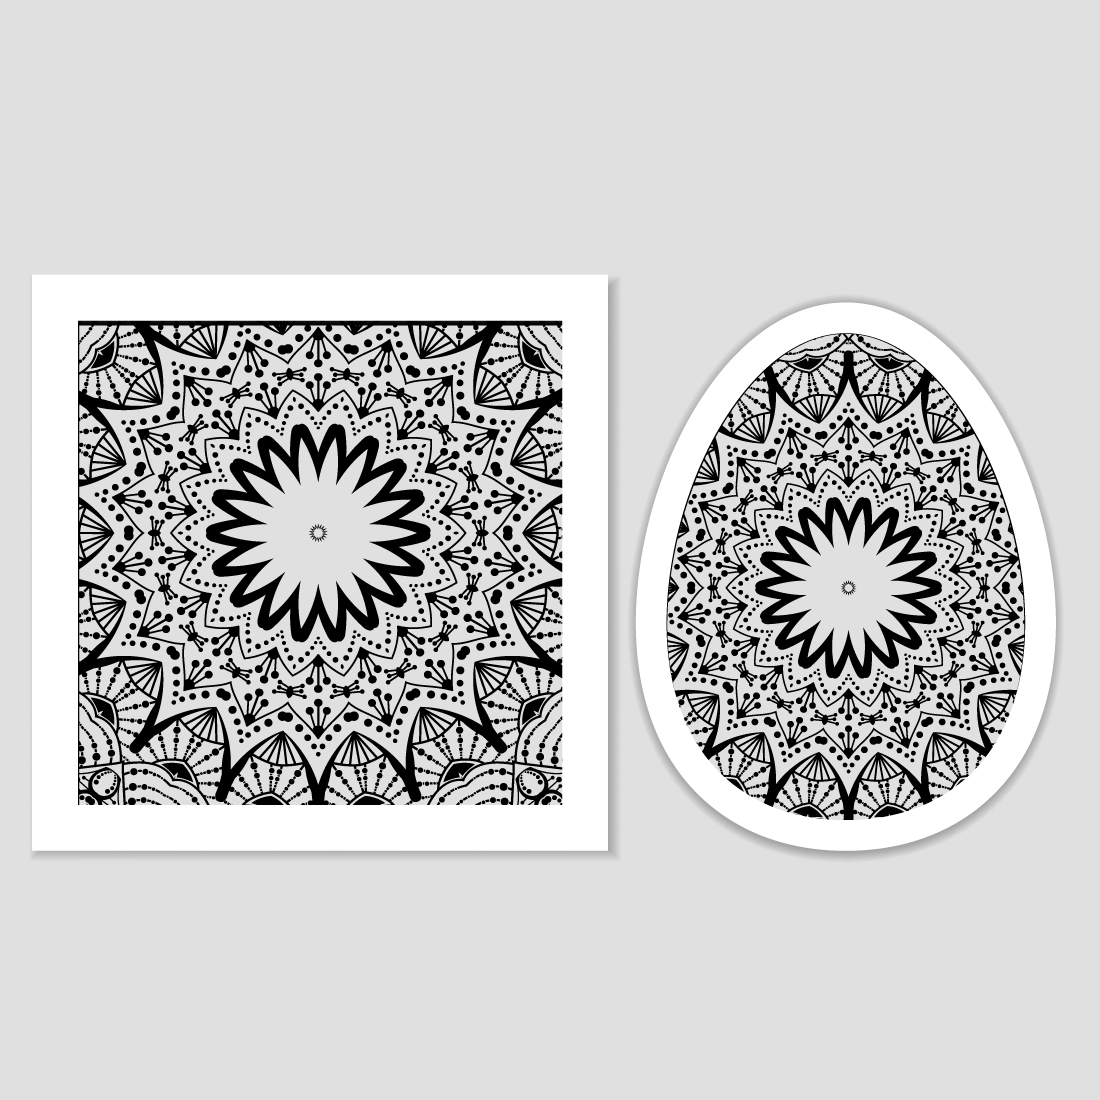 Bundle of 10 Relaxation Mandalas for Paper Cutting or Coloring Book